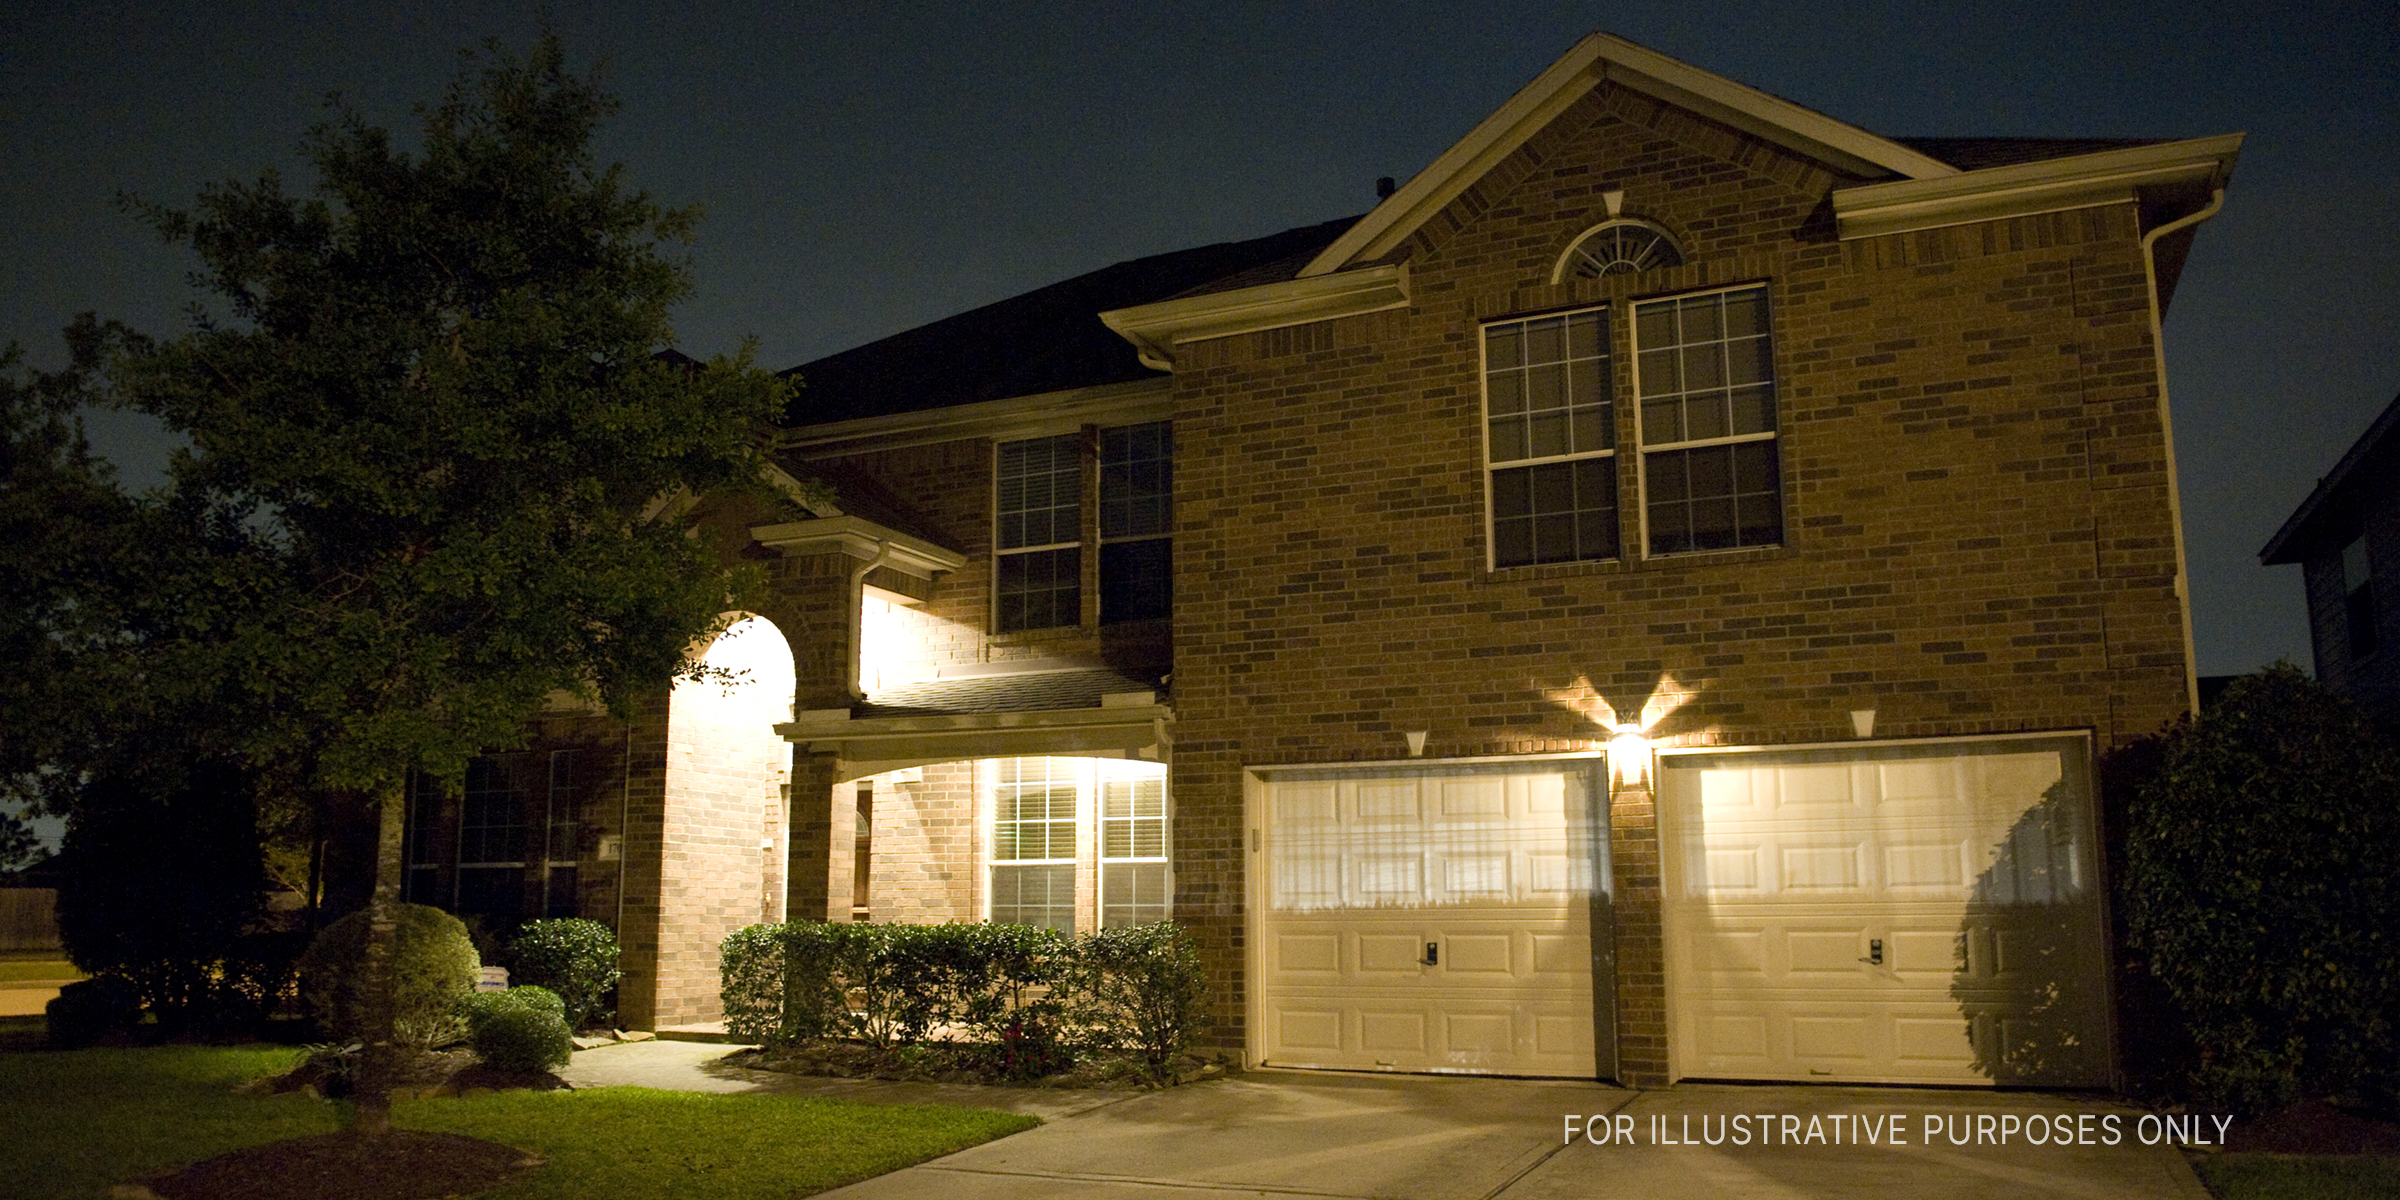 Suburban house at night. | Source: Flickr/gsloan (CC BY 2.0)